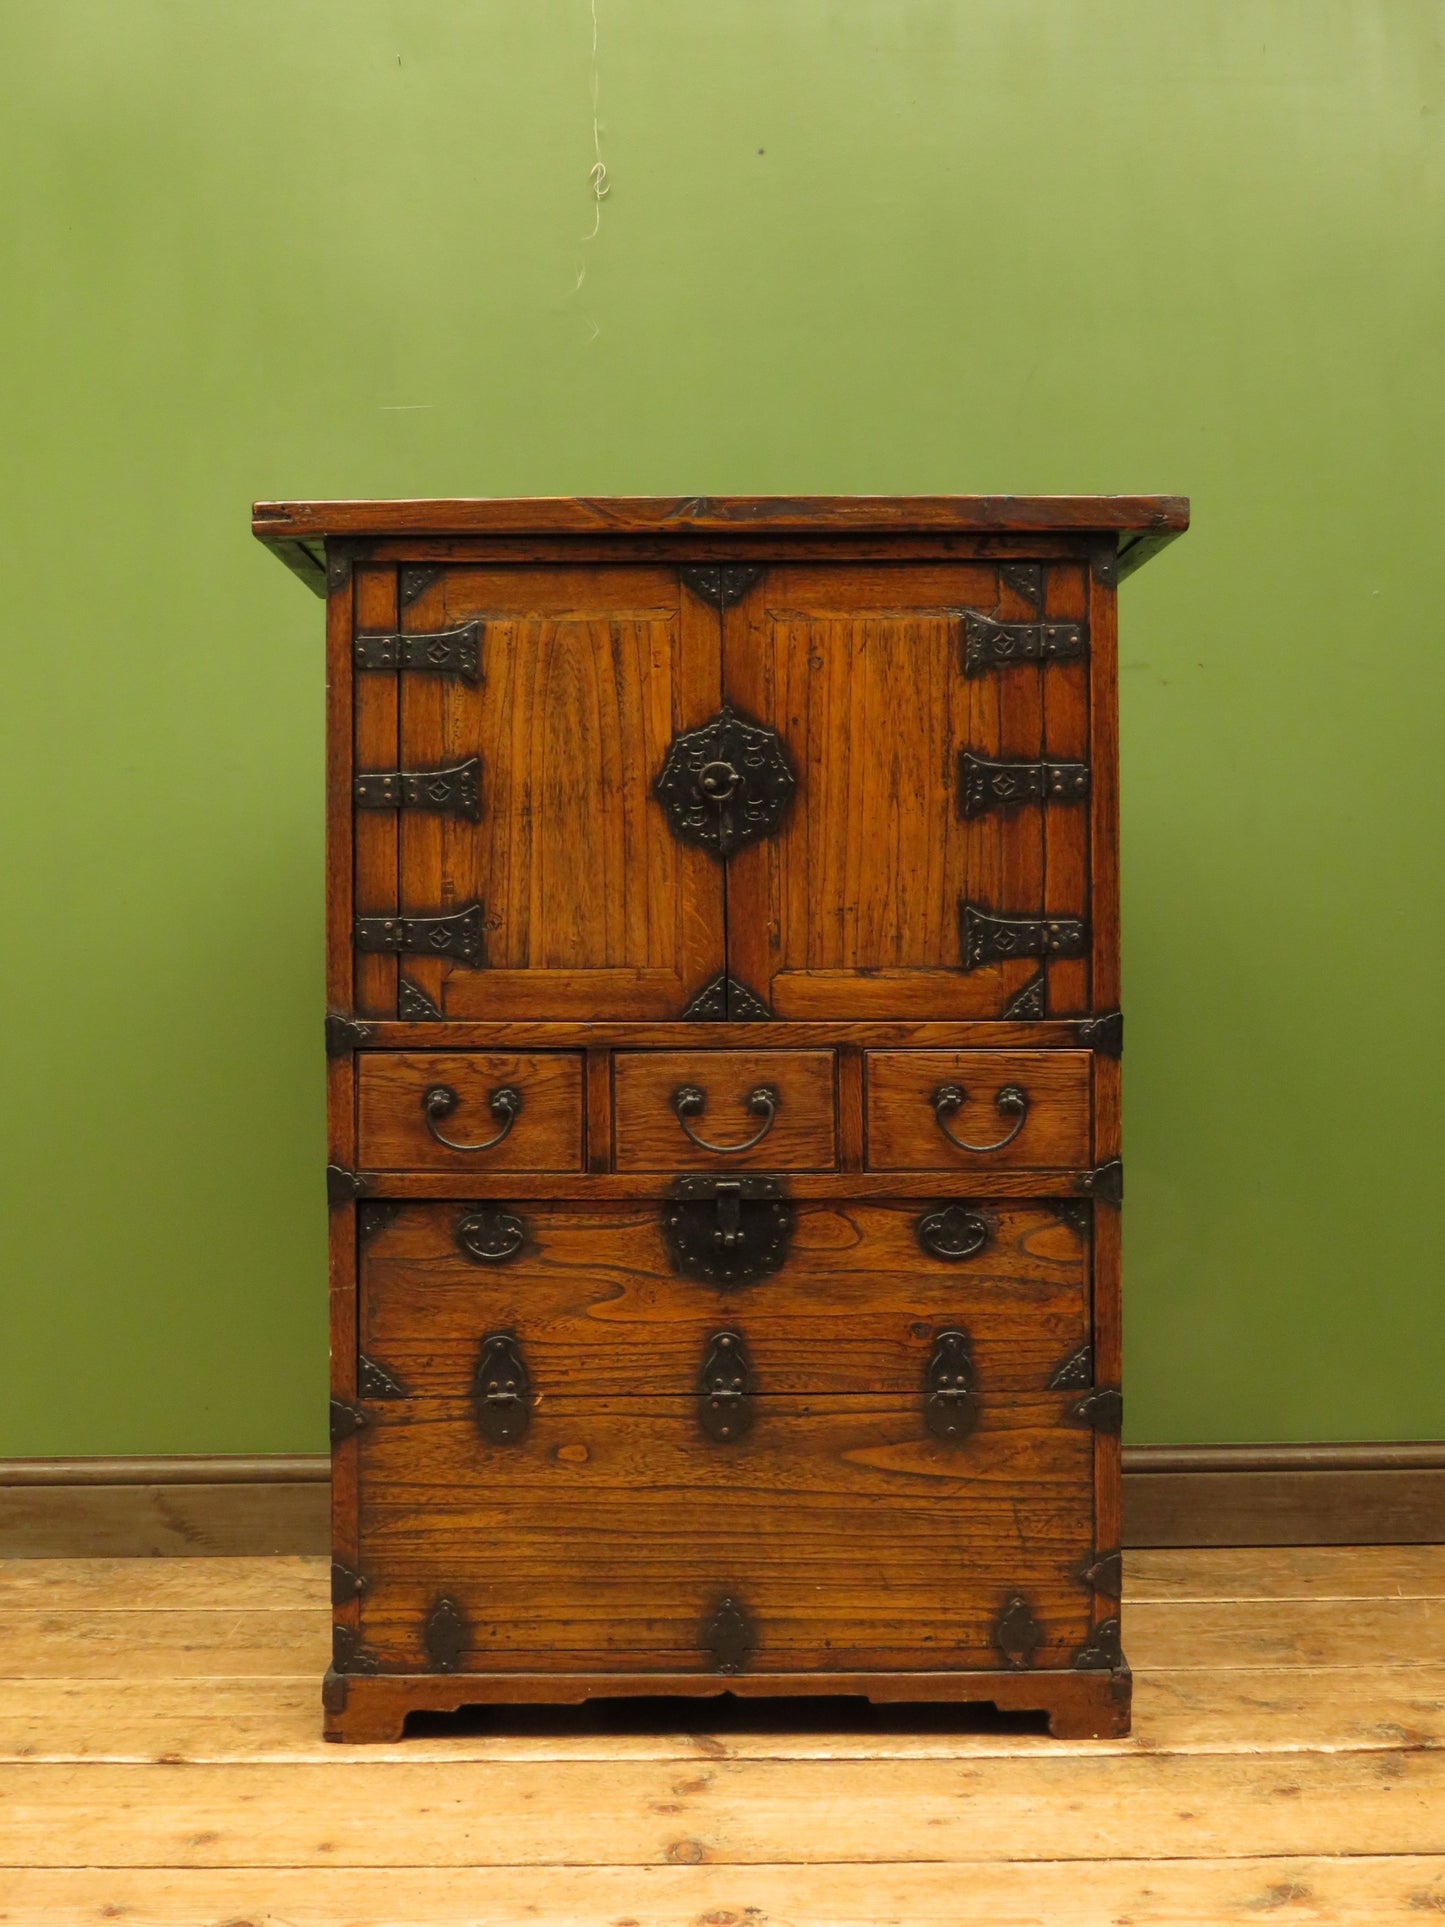 Early 20th Century Korean Cabinet with Ornate Fittings